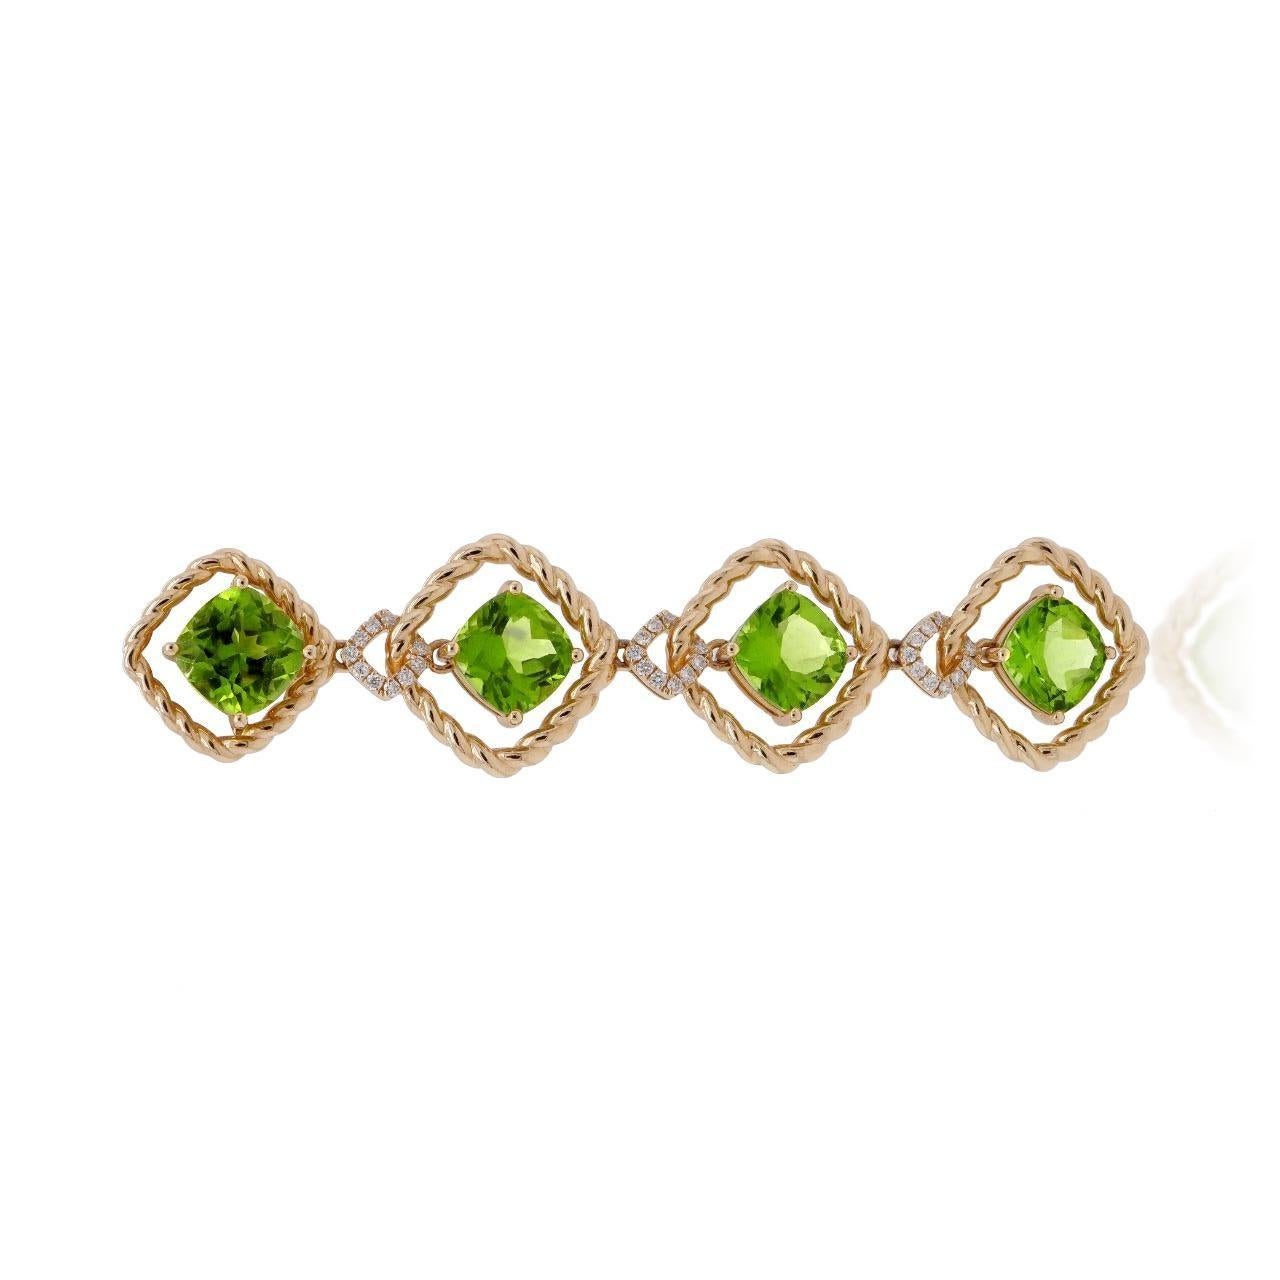 POLINA Special Earrings 
18K Yellow Gold EARRINGS With natural PERIDOT and Diamonds
18K Y -  16.13gm 
60 Round Diamonds -0.41 ct
8 Peridot -18.11 ct

one pair only! rare to find same size stones!